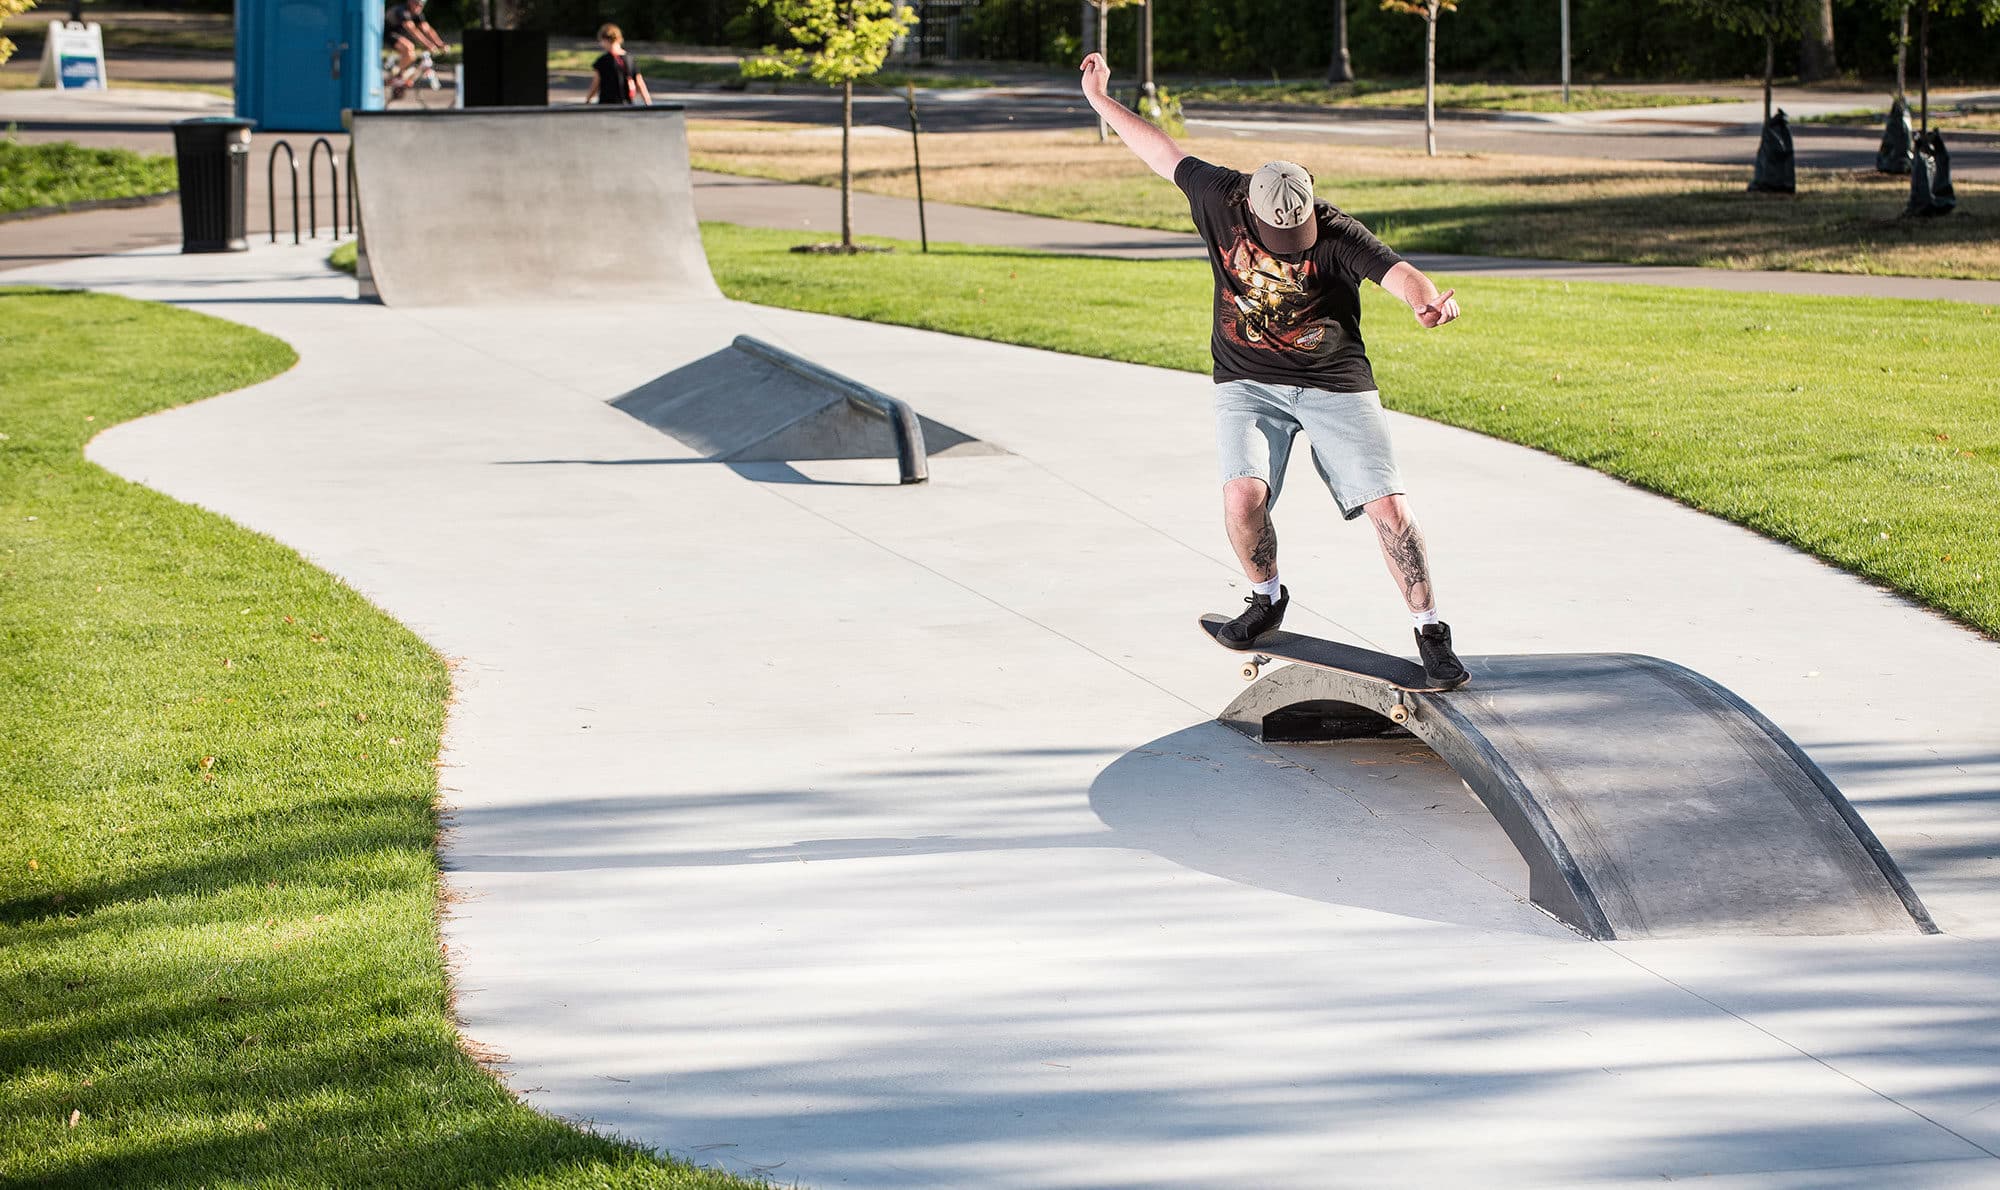 The skate path at Gateway Park in St. Paul provides various humps for riding or tricks